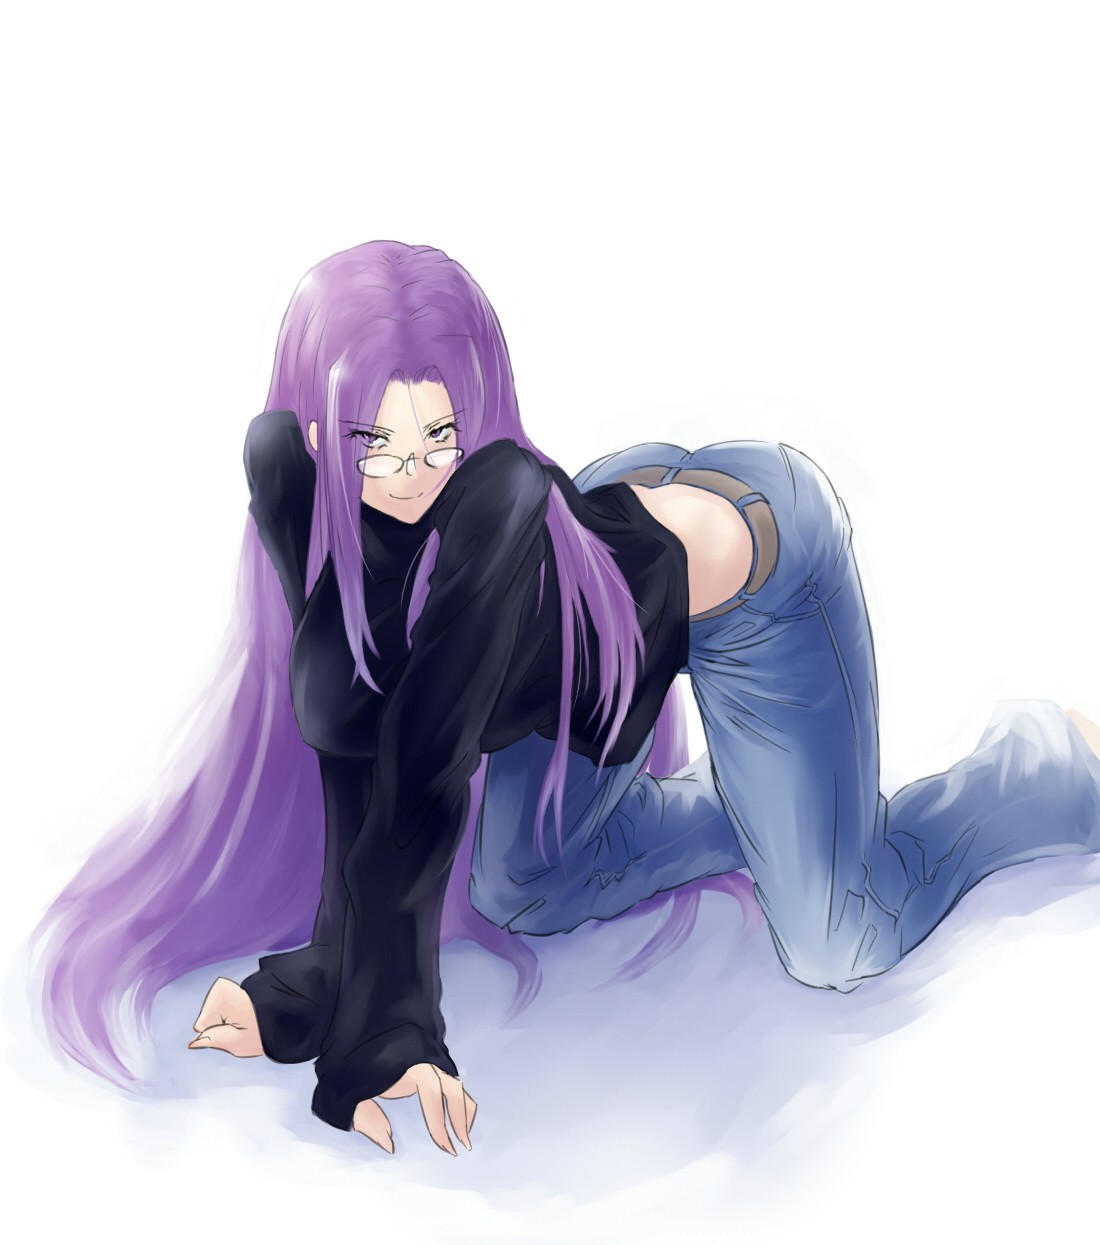 Anime 1100x1245 Fate series Fate/Stay Night anime girls Rider (Fate/Stay Night) long hair